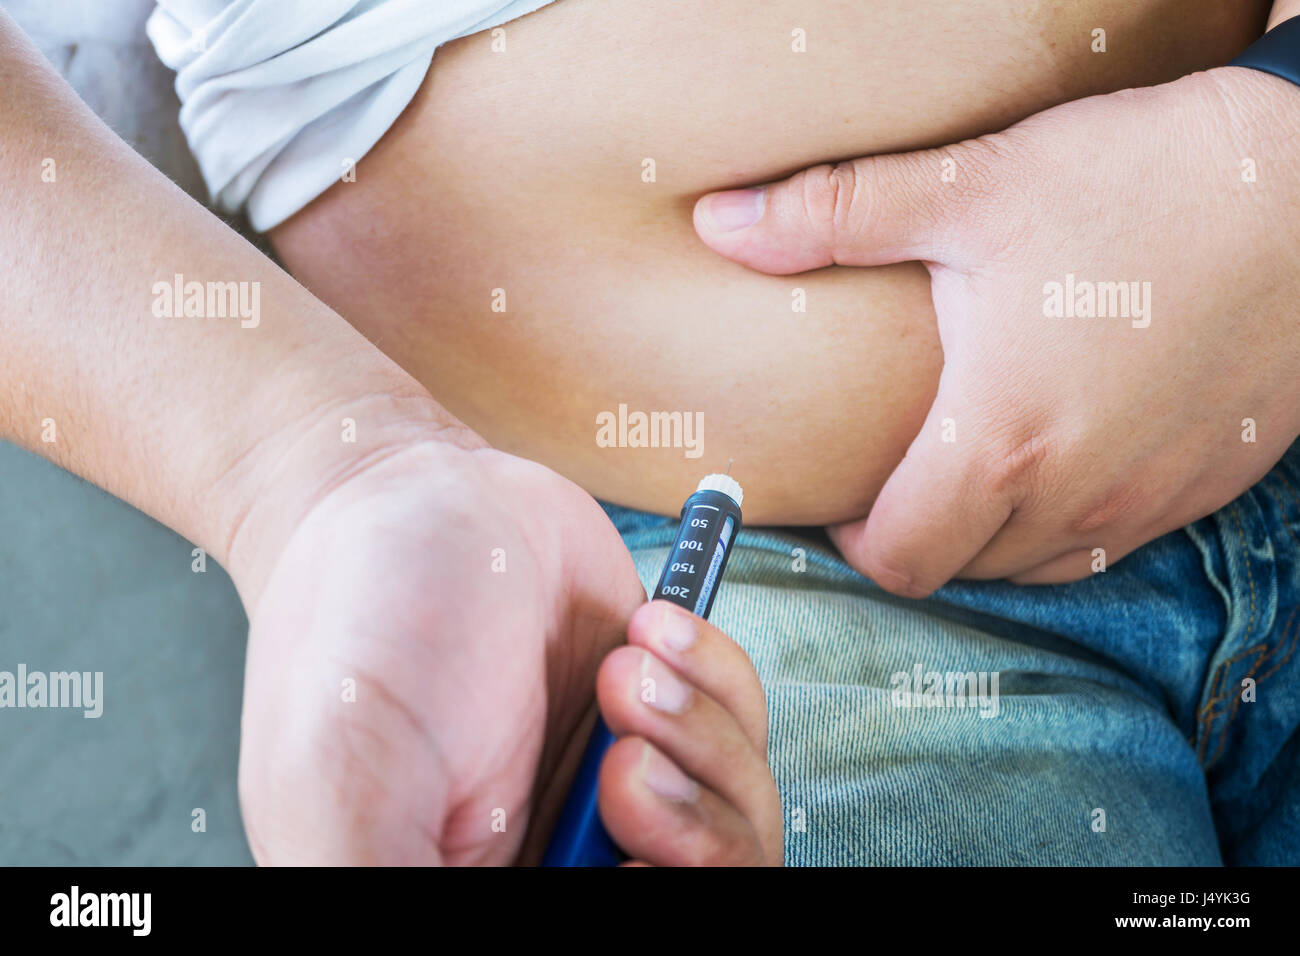 Male diabetes patient injecting insulin in his abdomen area Stock Photo